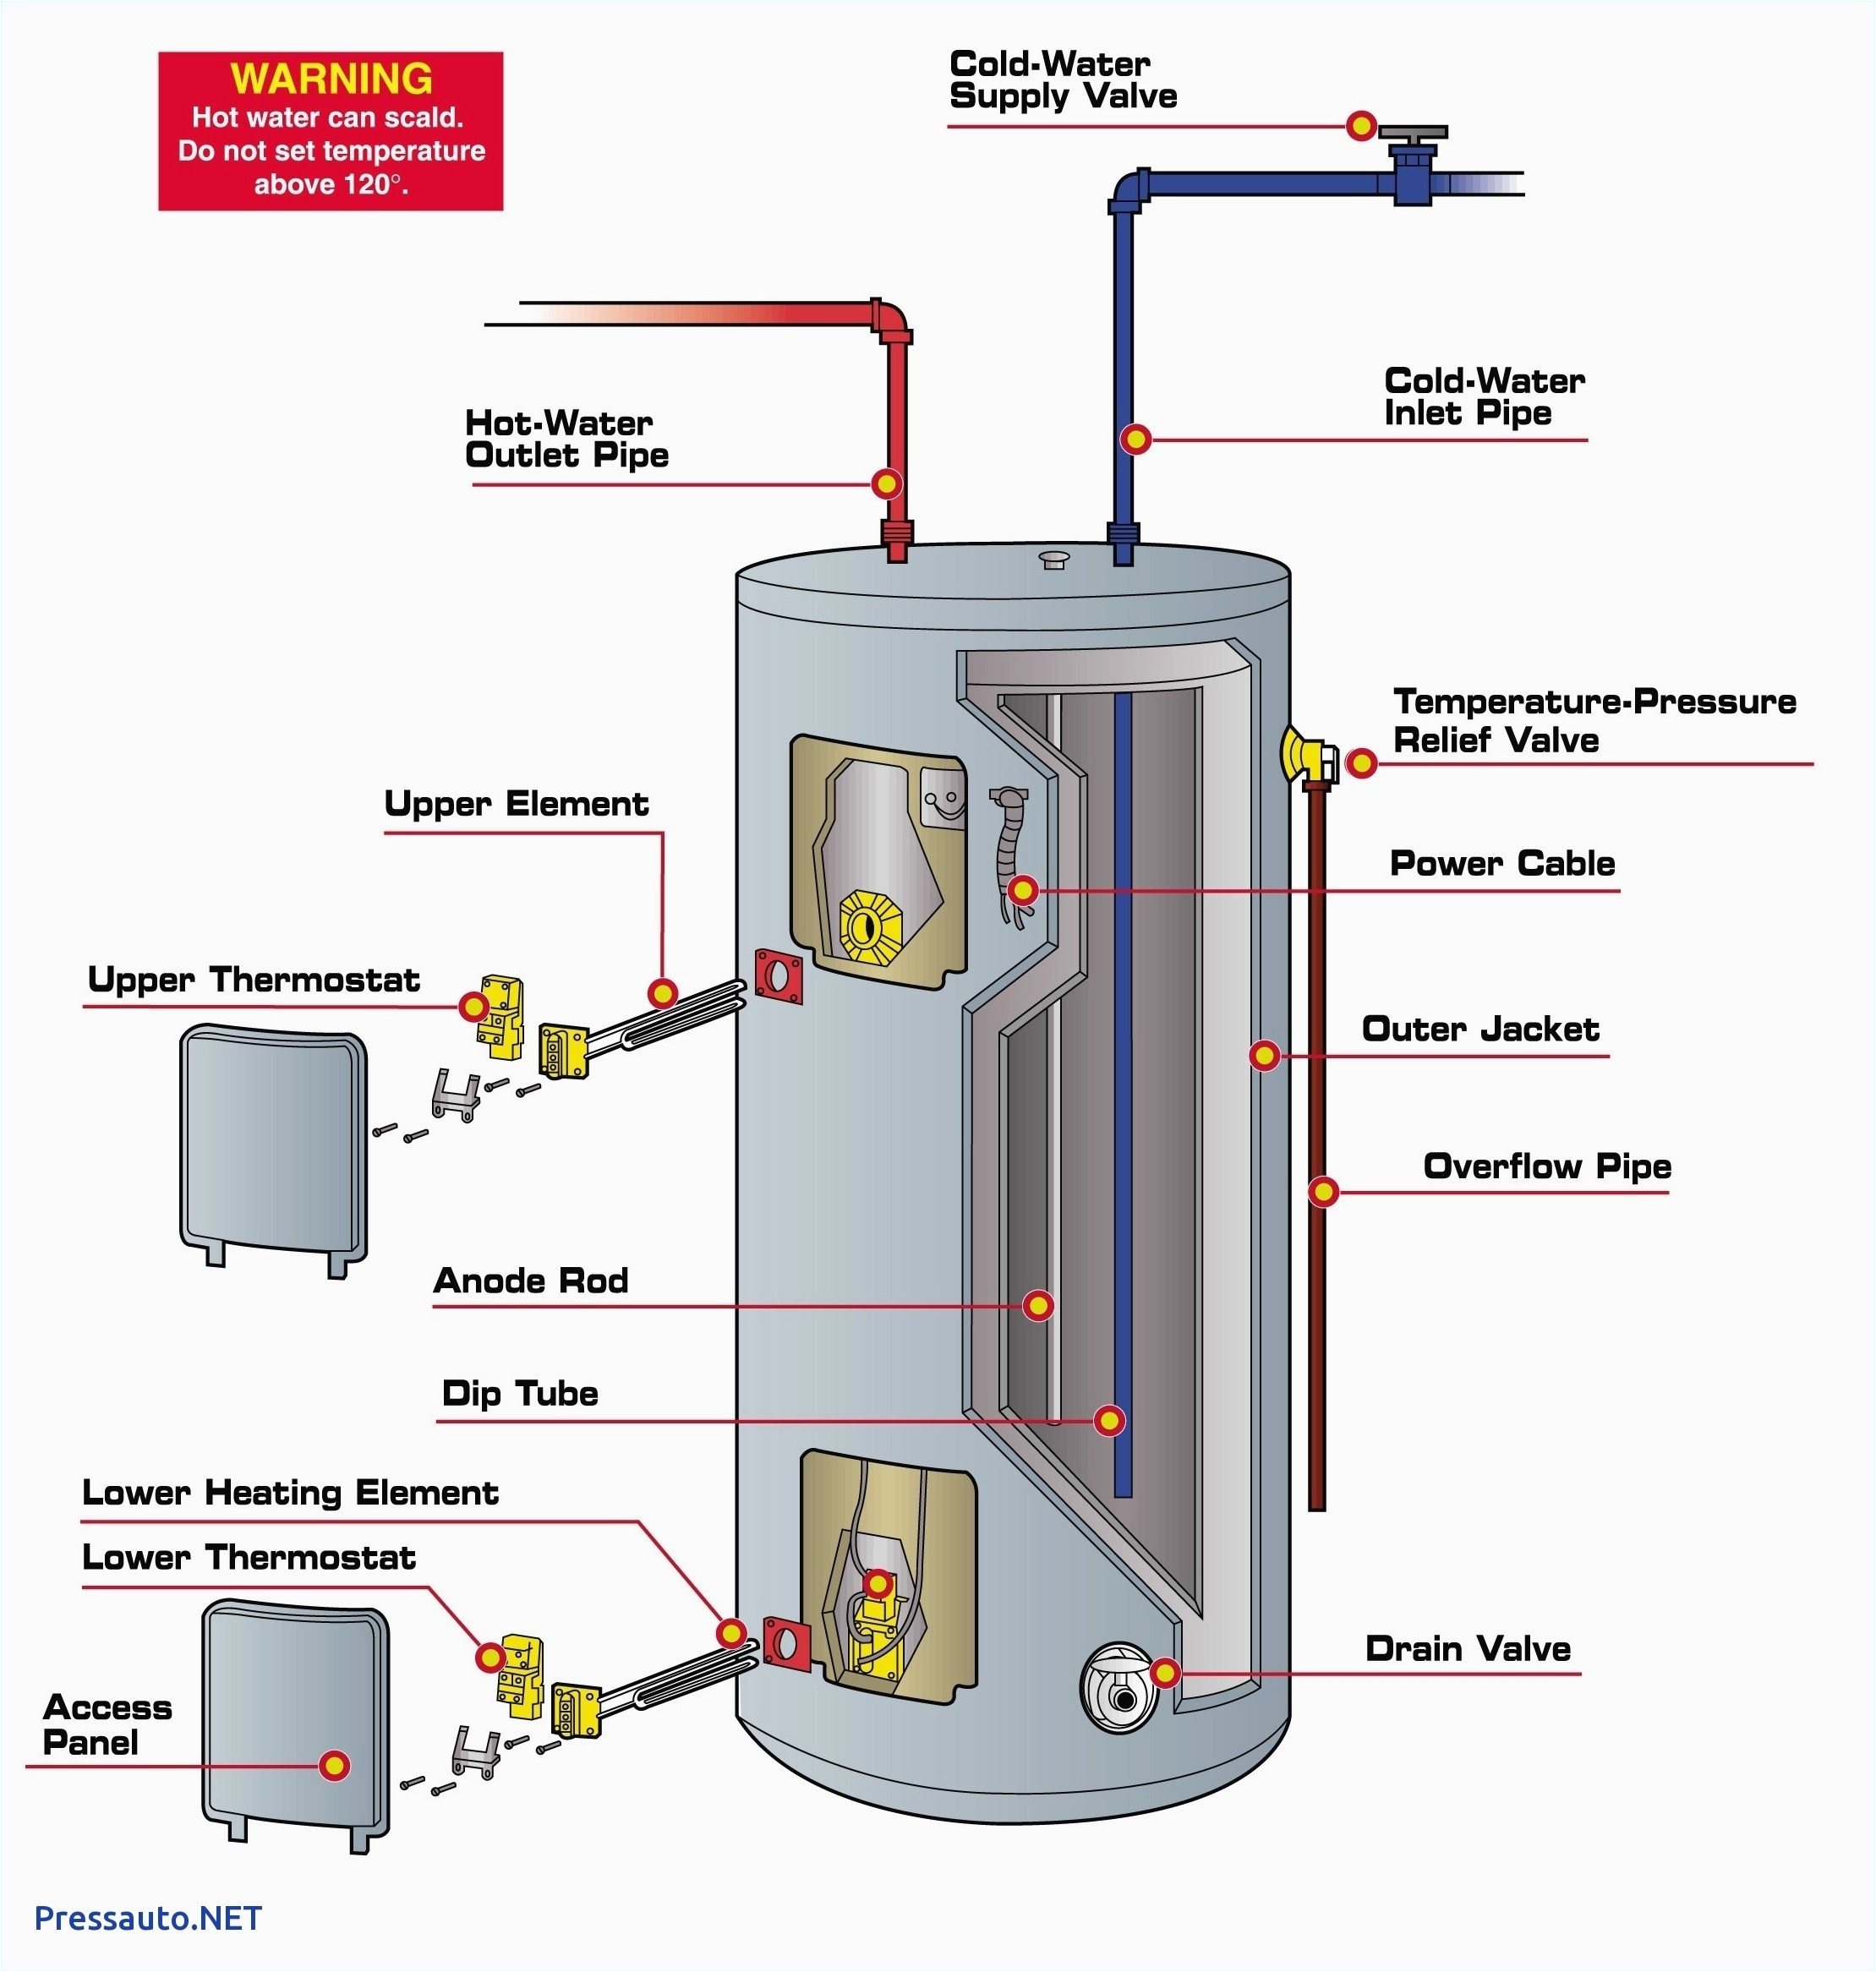 wiring a hot water heater diagram get free image about wiring 3 phase water heater wiring diagram free download